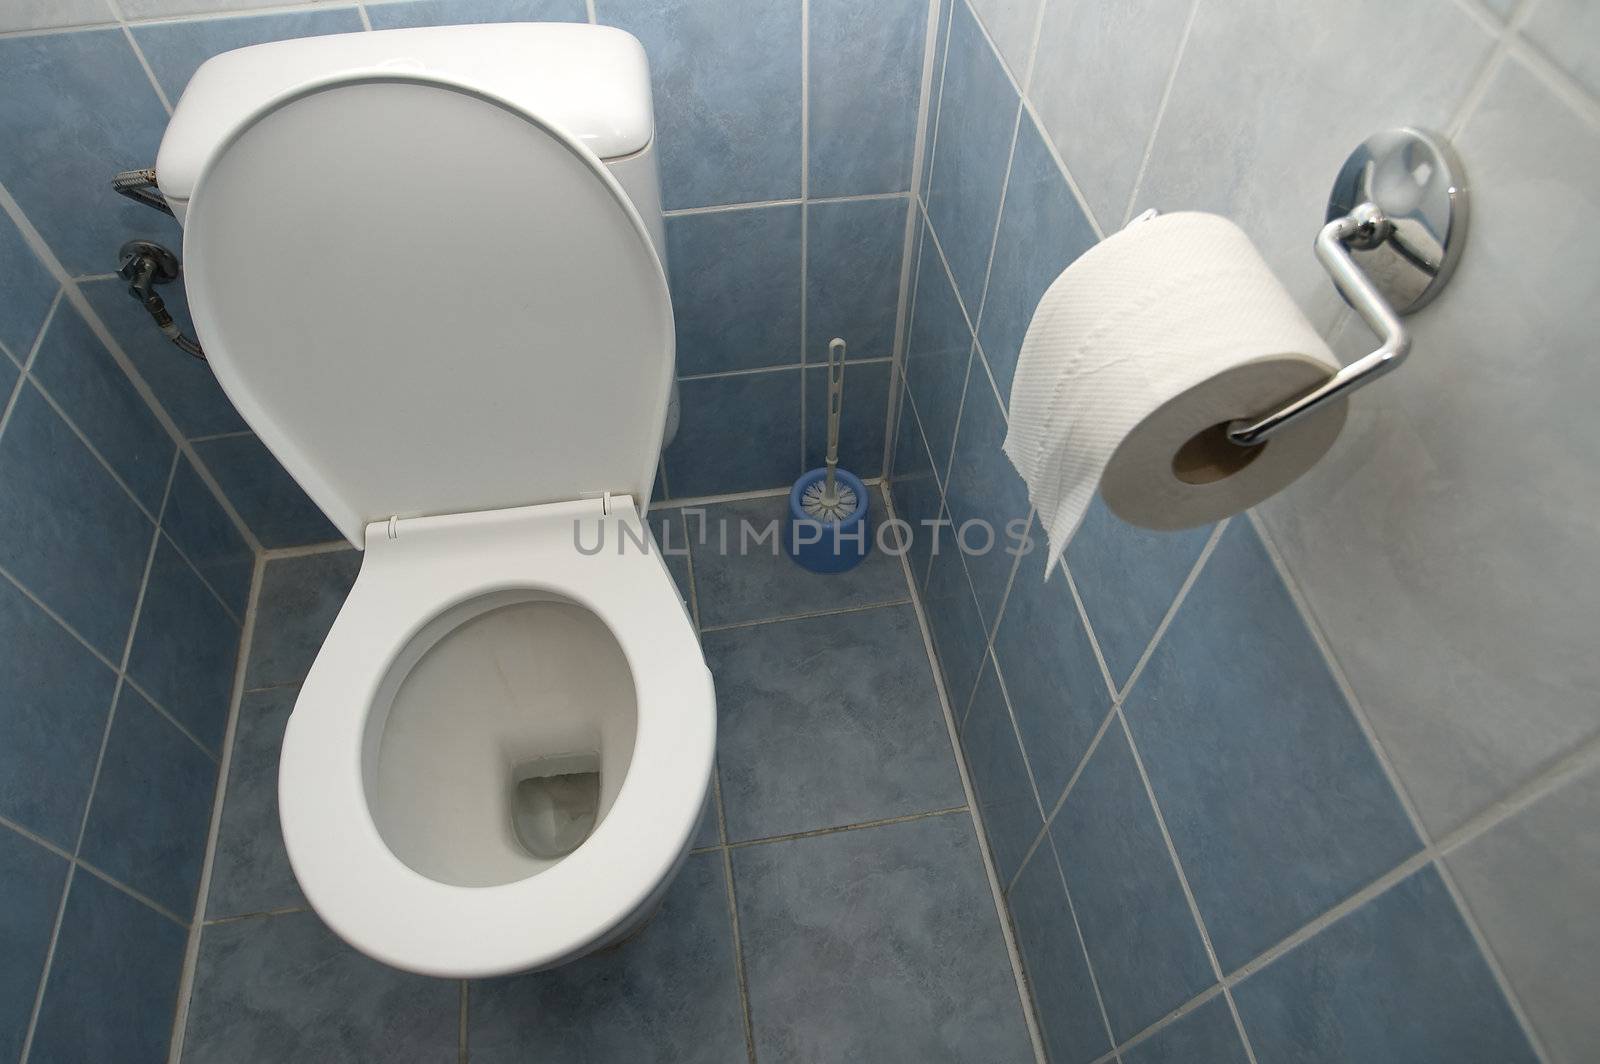 clean toilet interior, tiled walls and floor